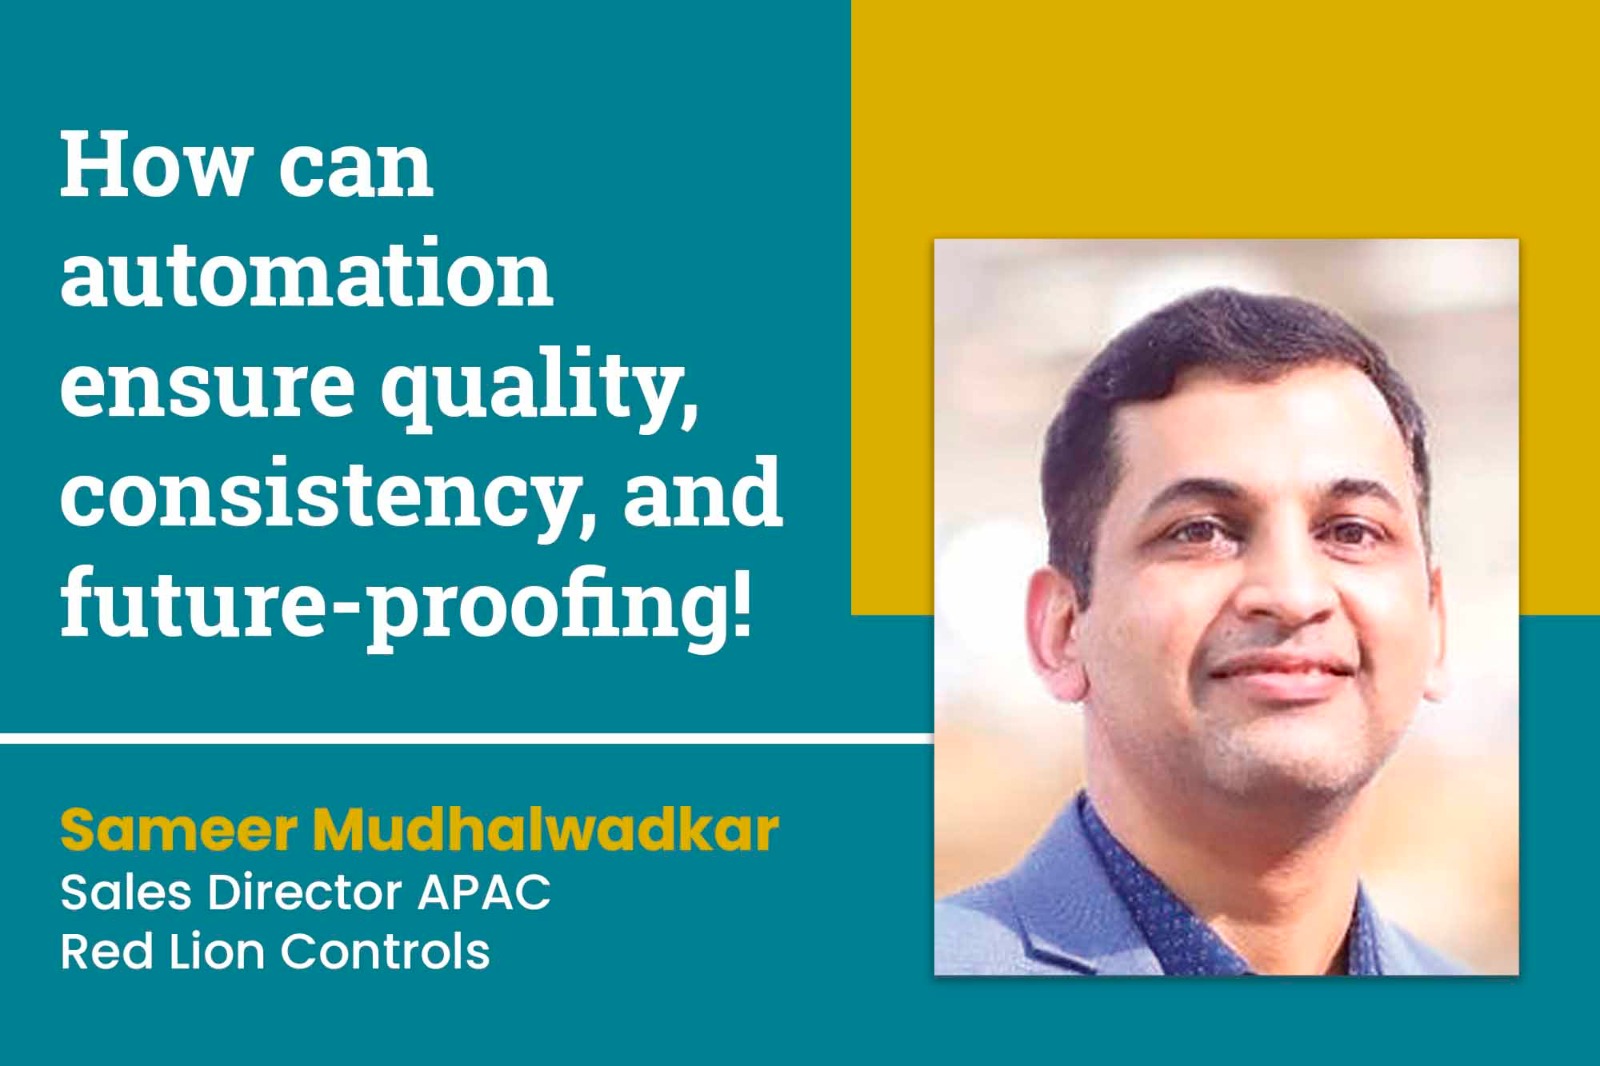 How can automation ensure quality, consistency, and future-proofing?